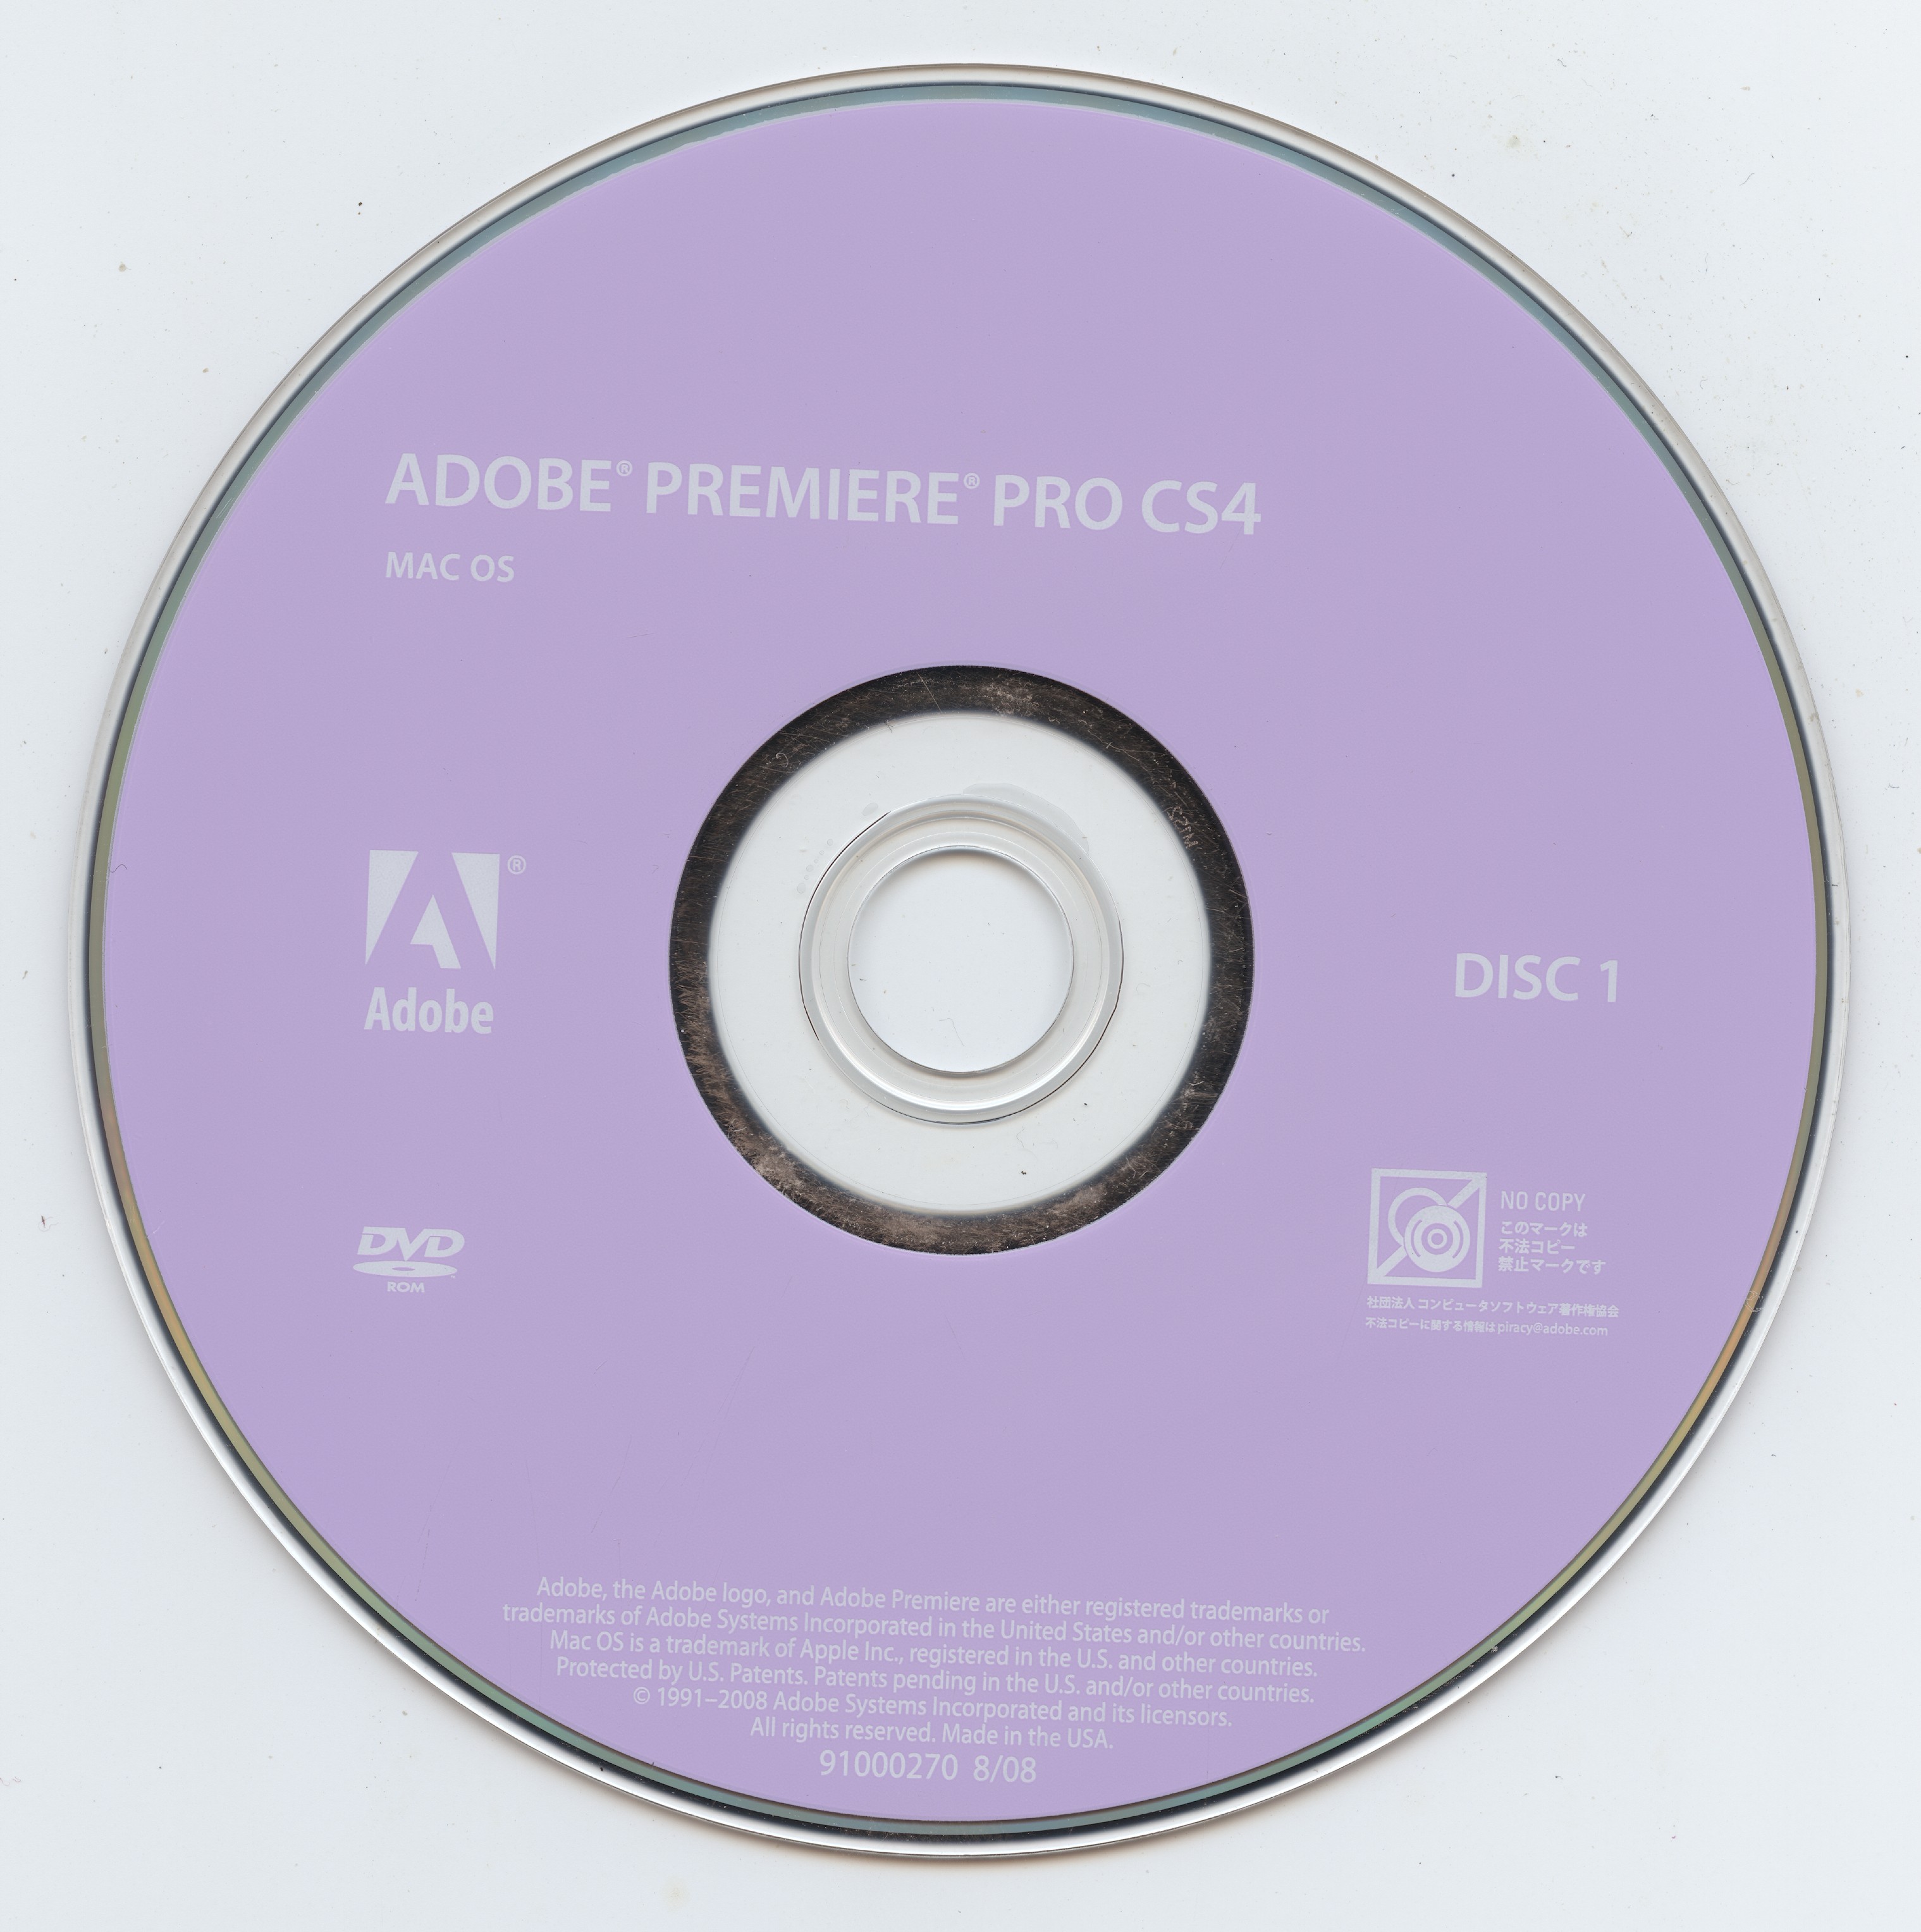 Adobe premiere pro cs4 download for windows 8 how to download amazon appstore in windows 11